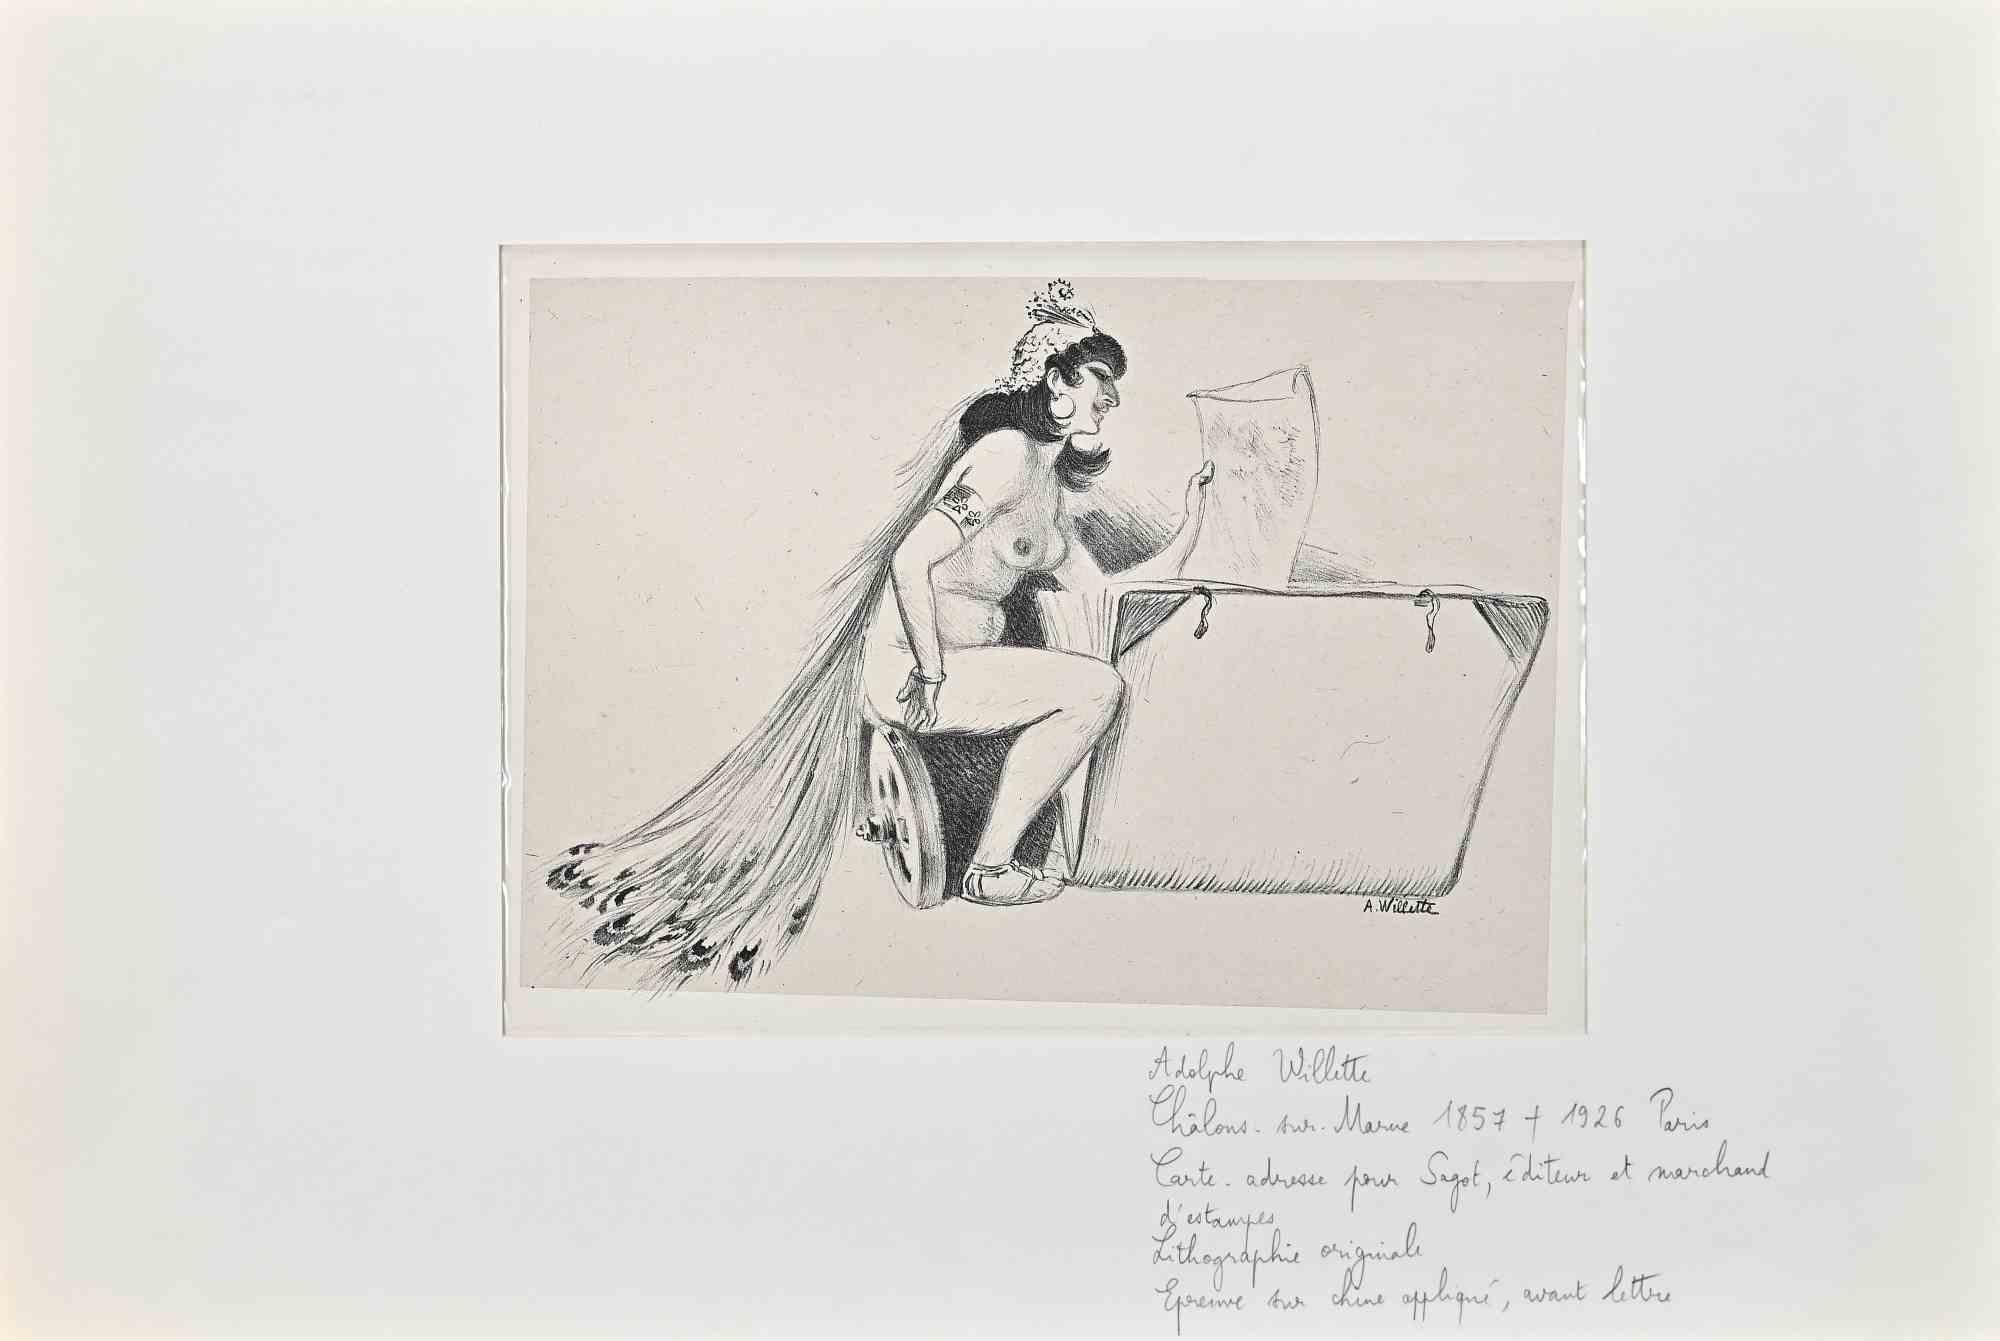 Nude of Woman is an Original Lithograph realized by Willette (Adolphe Léon).

Good condition on a grey paper included a white cardboard passpartout (32.5x48 cm).

Address card for Sagot, publisher and printmaker.

Hand signed with pencil  on the